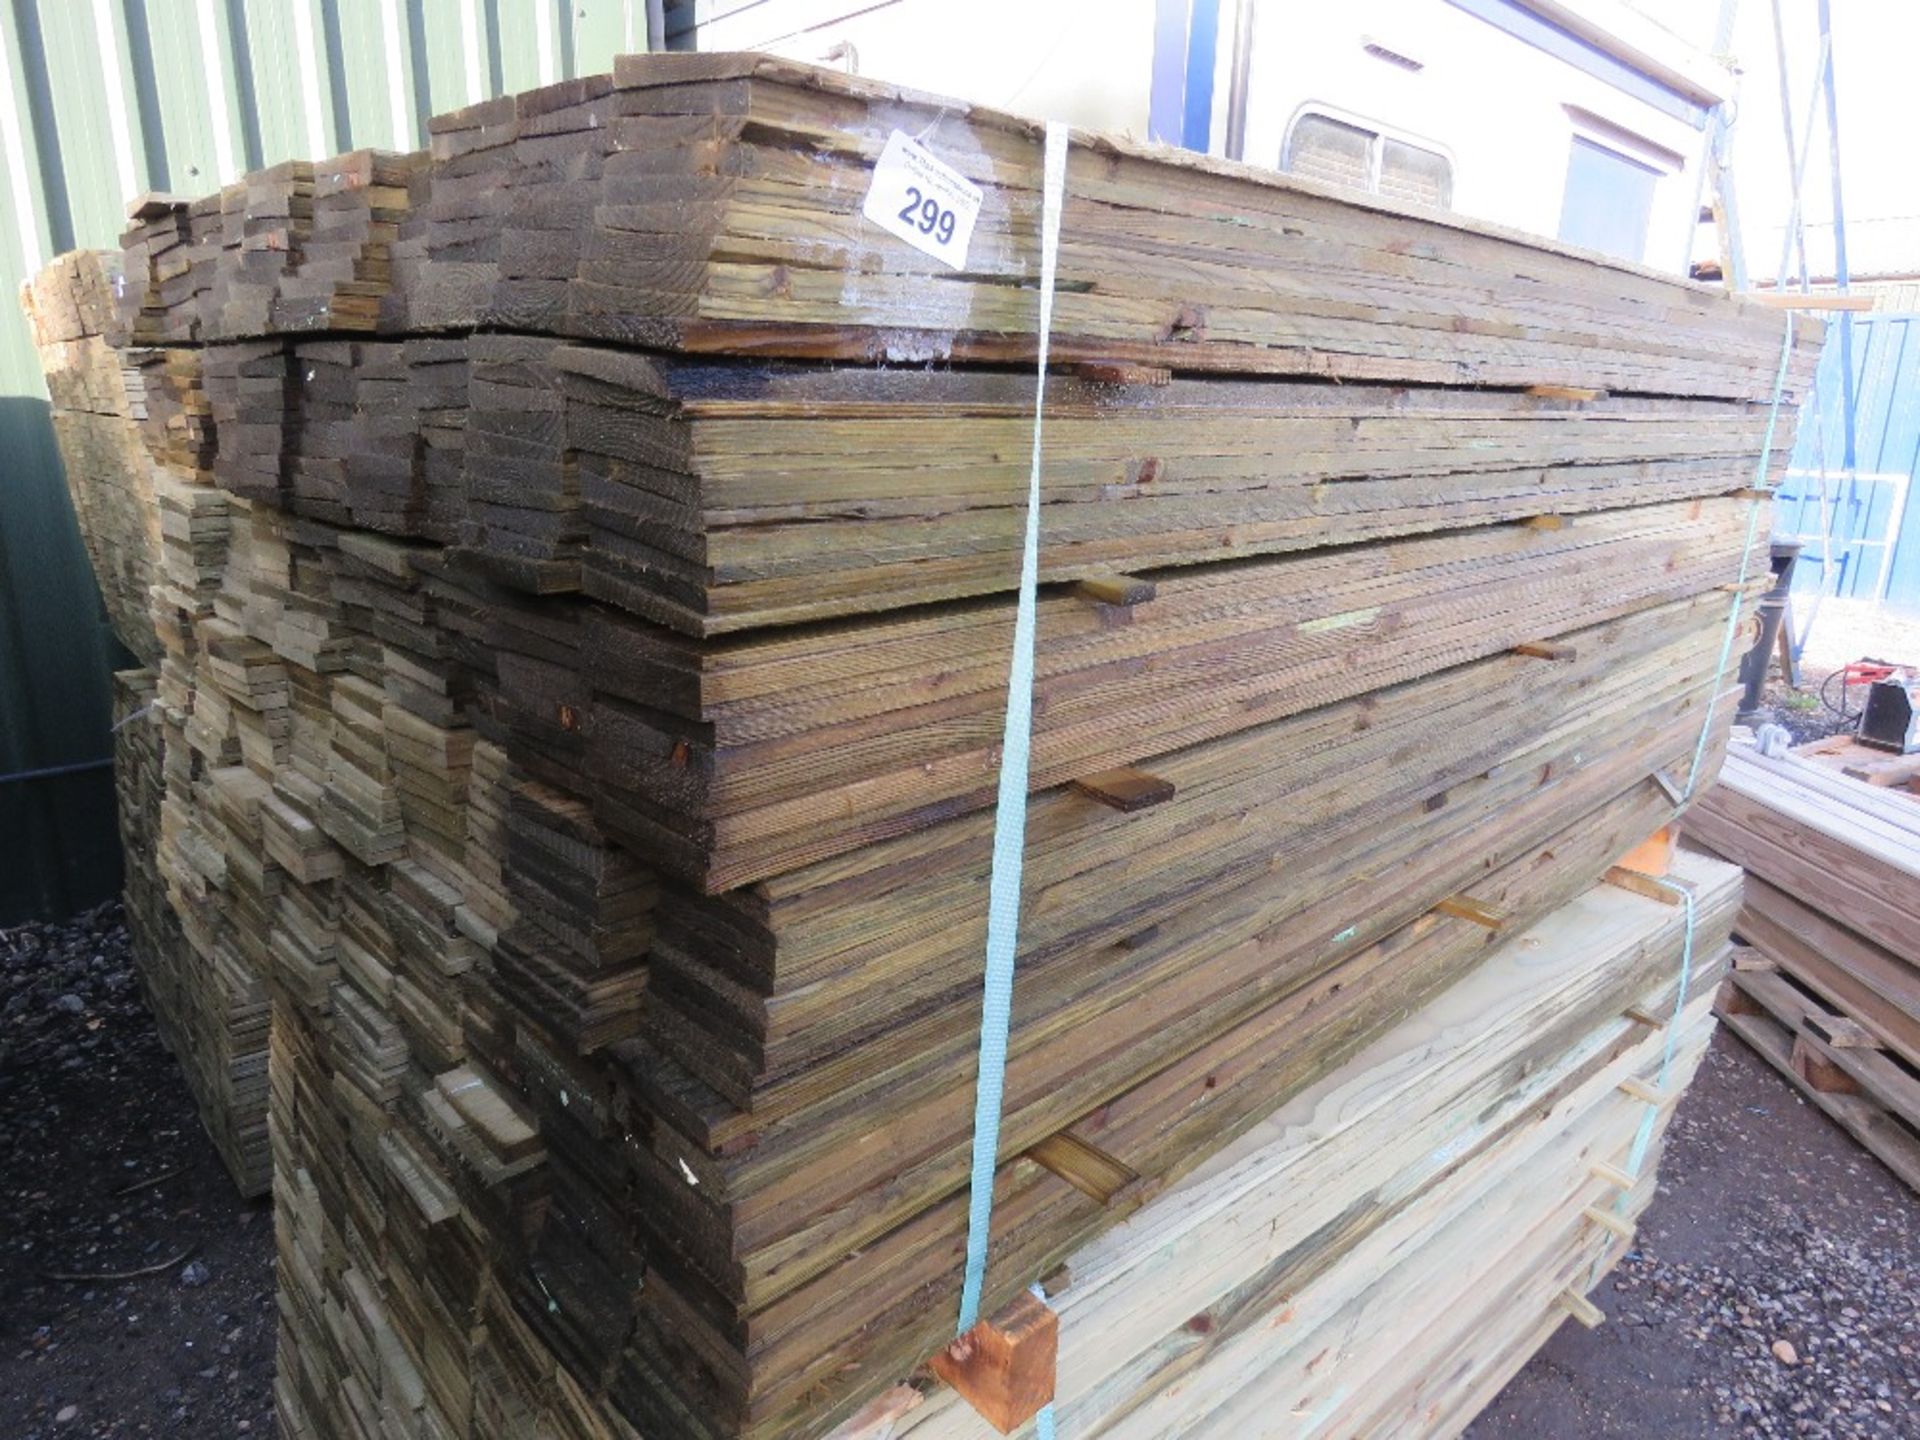 LARGE PACK OF PRESSURE TREATED FEATHER EDGE CLADDING TIMBER BOARDS. 1.8M X 100MM APPROX.